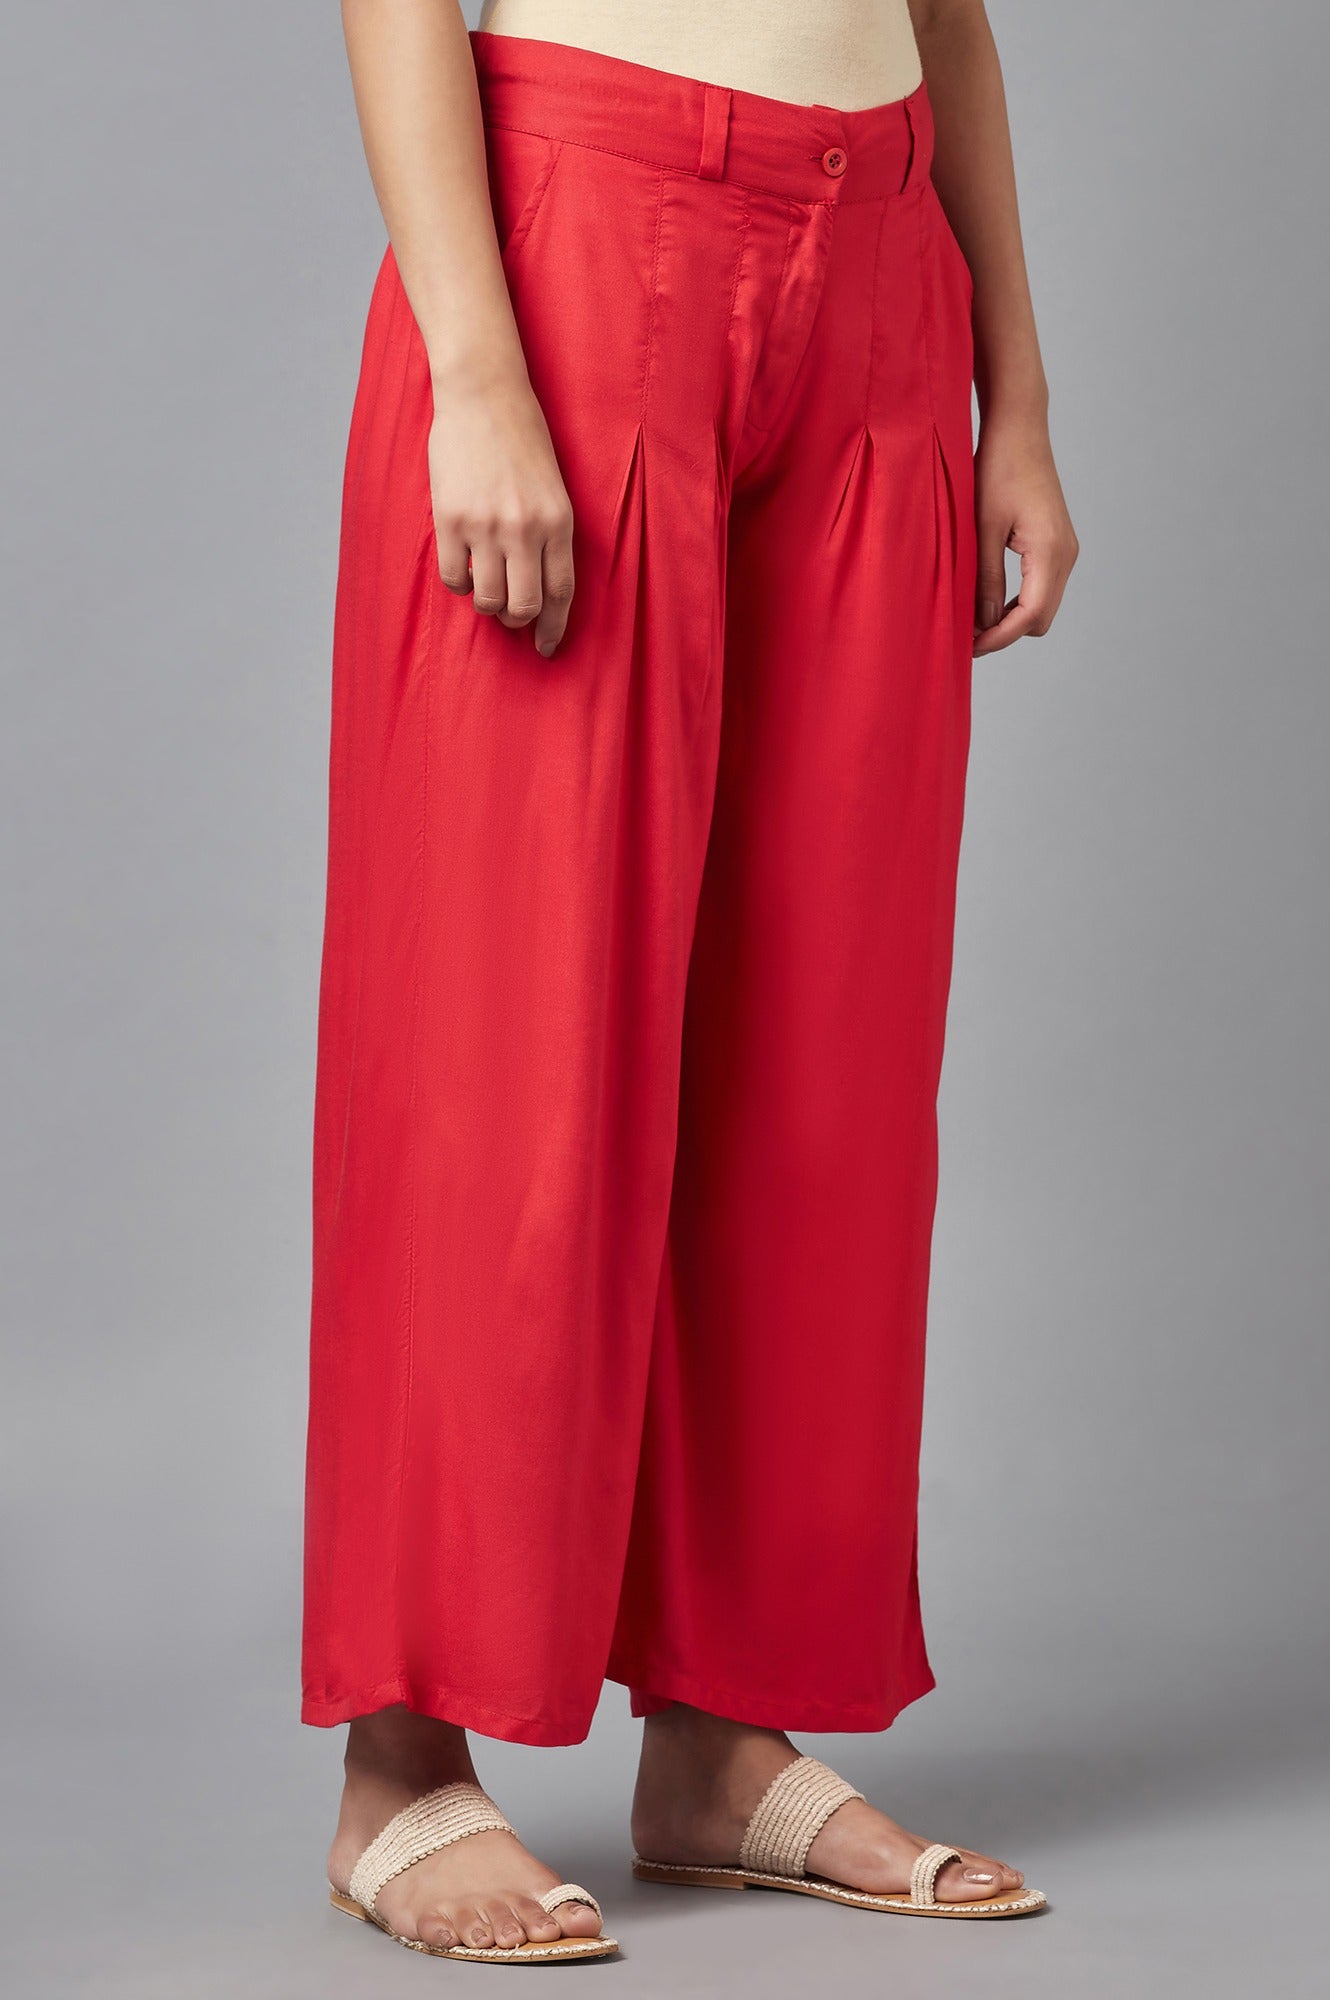 Red Ankle-length Pants